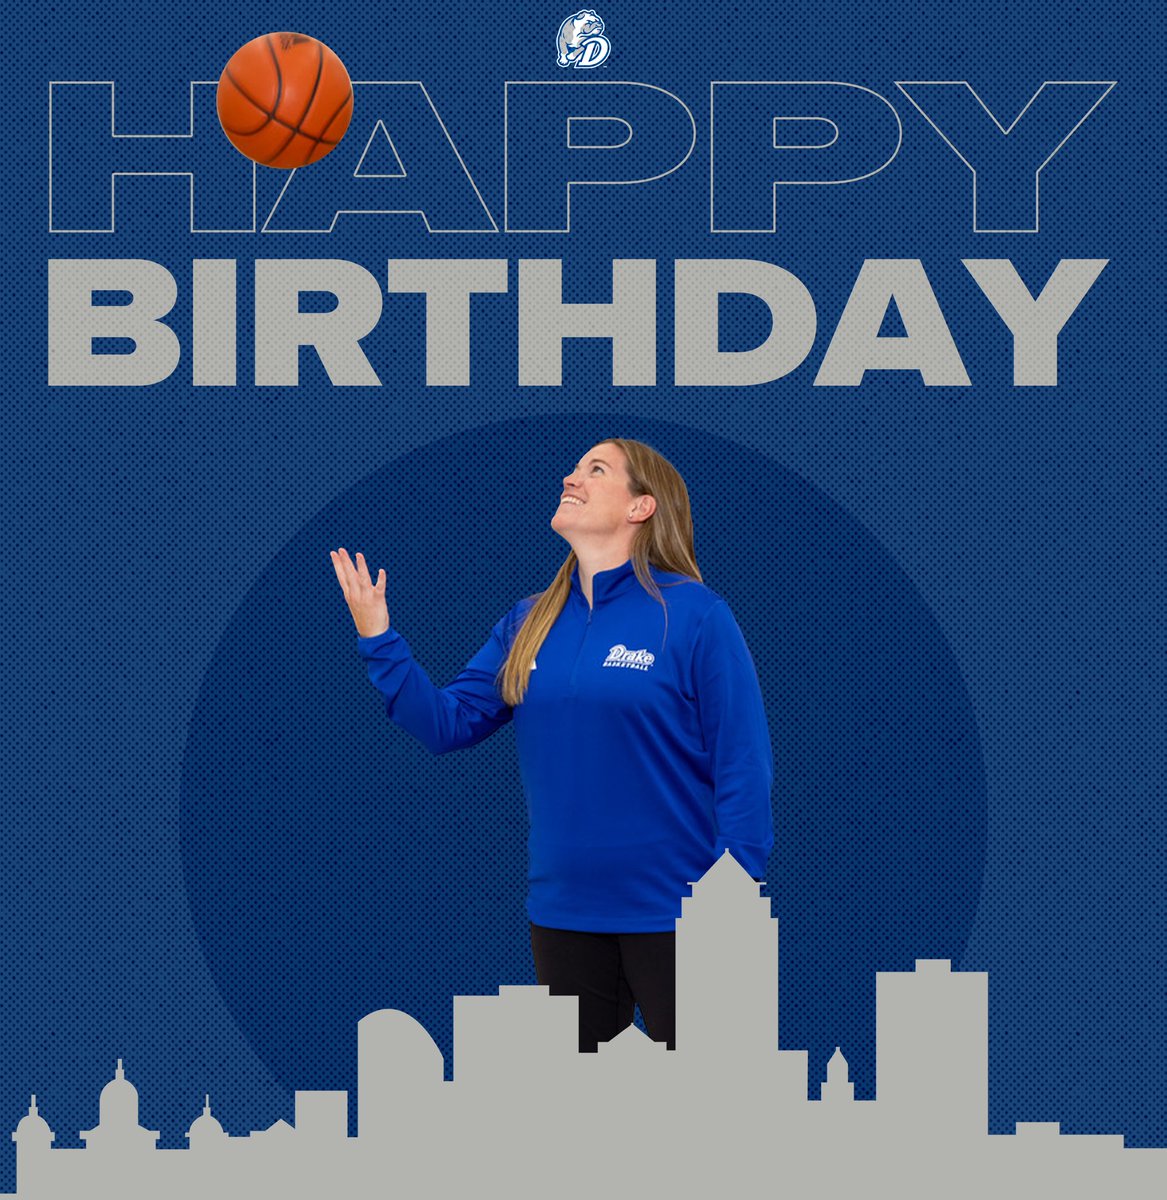 𝙃𝙖𝙥𝙥𝙮 𝘽𝙞𝙧𝙩𝙝𝙙𝙖𝙮 to assistant coach Kelli Greenway! 🎂 #BeBlue